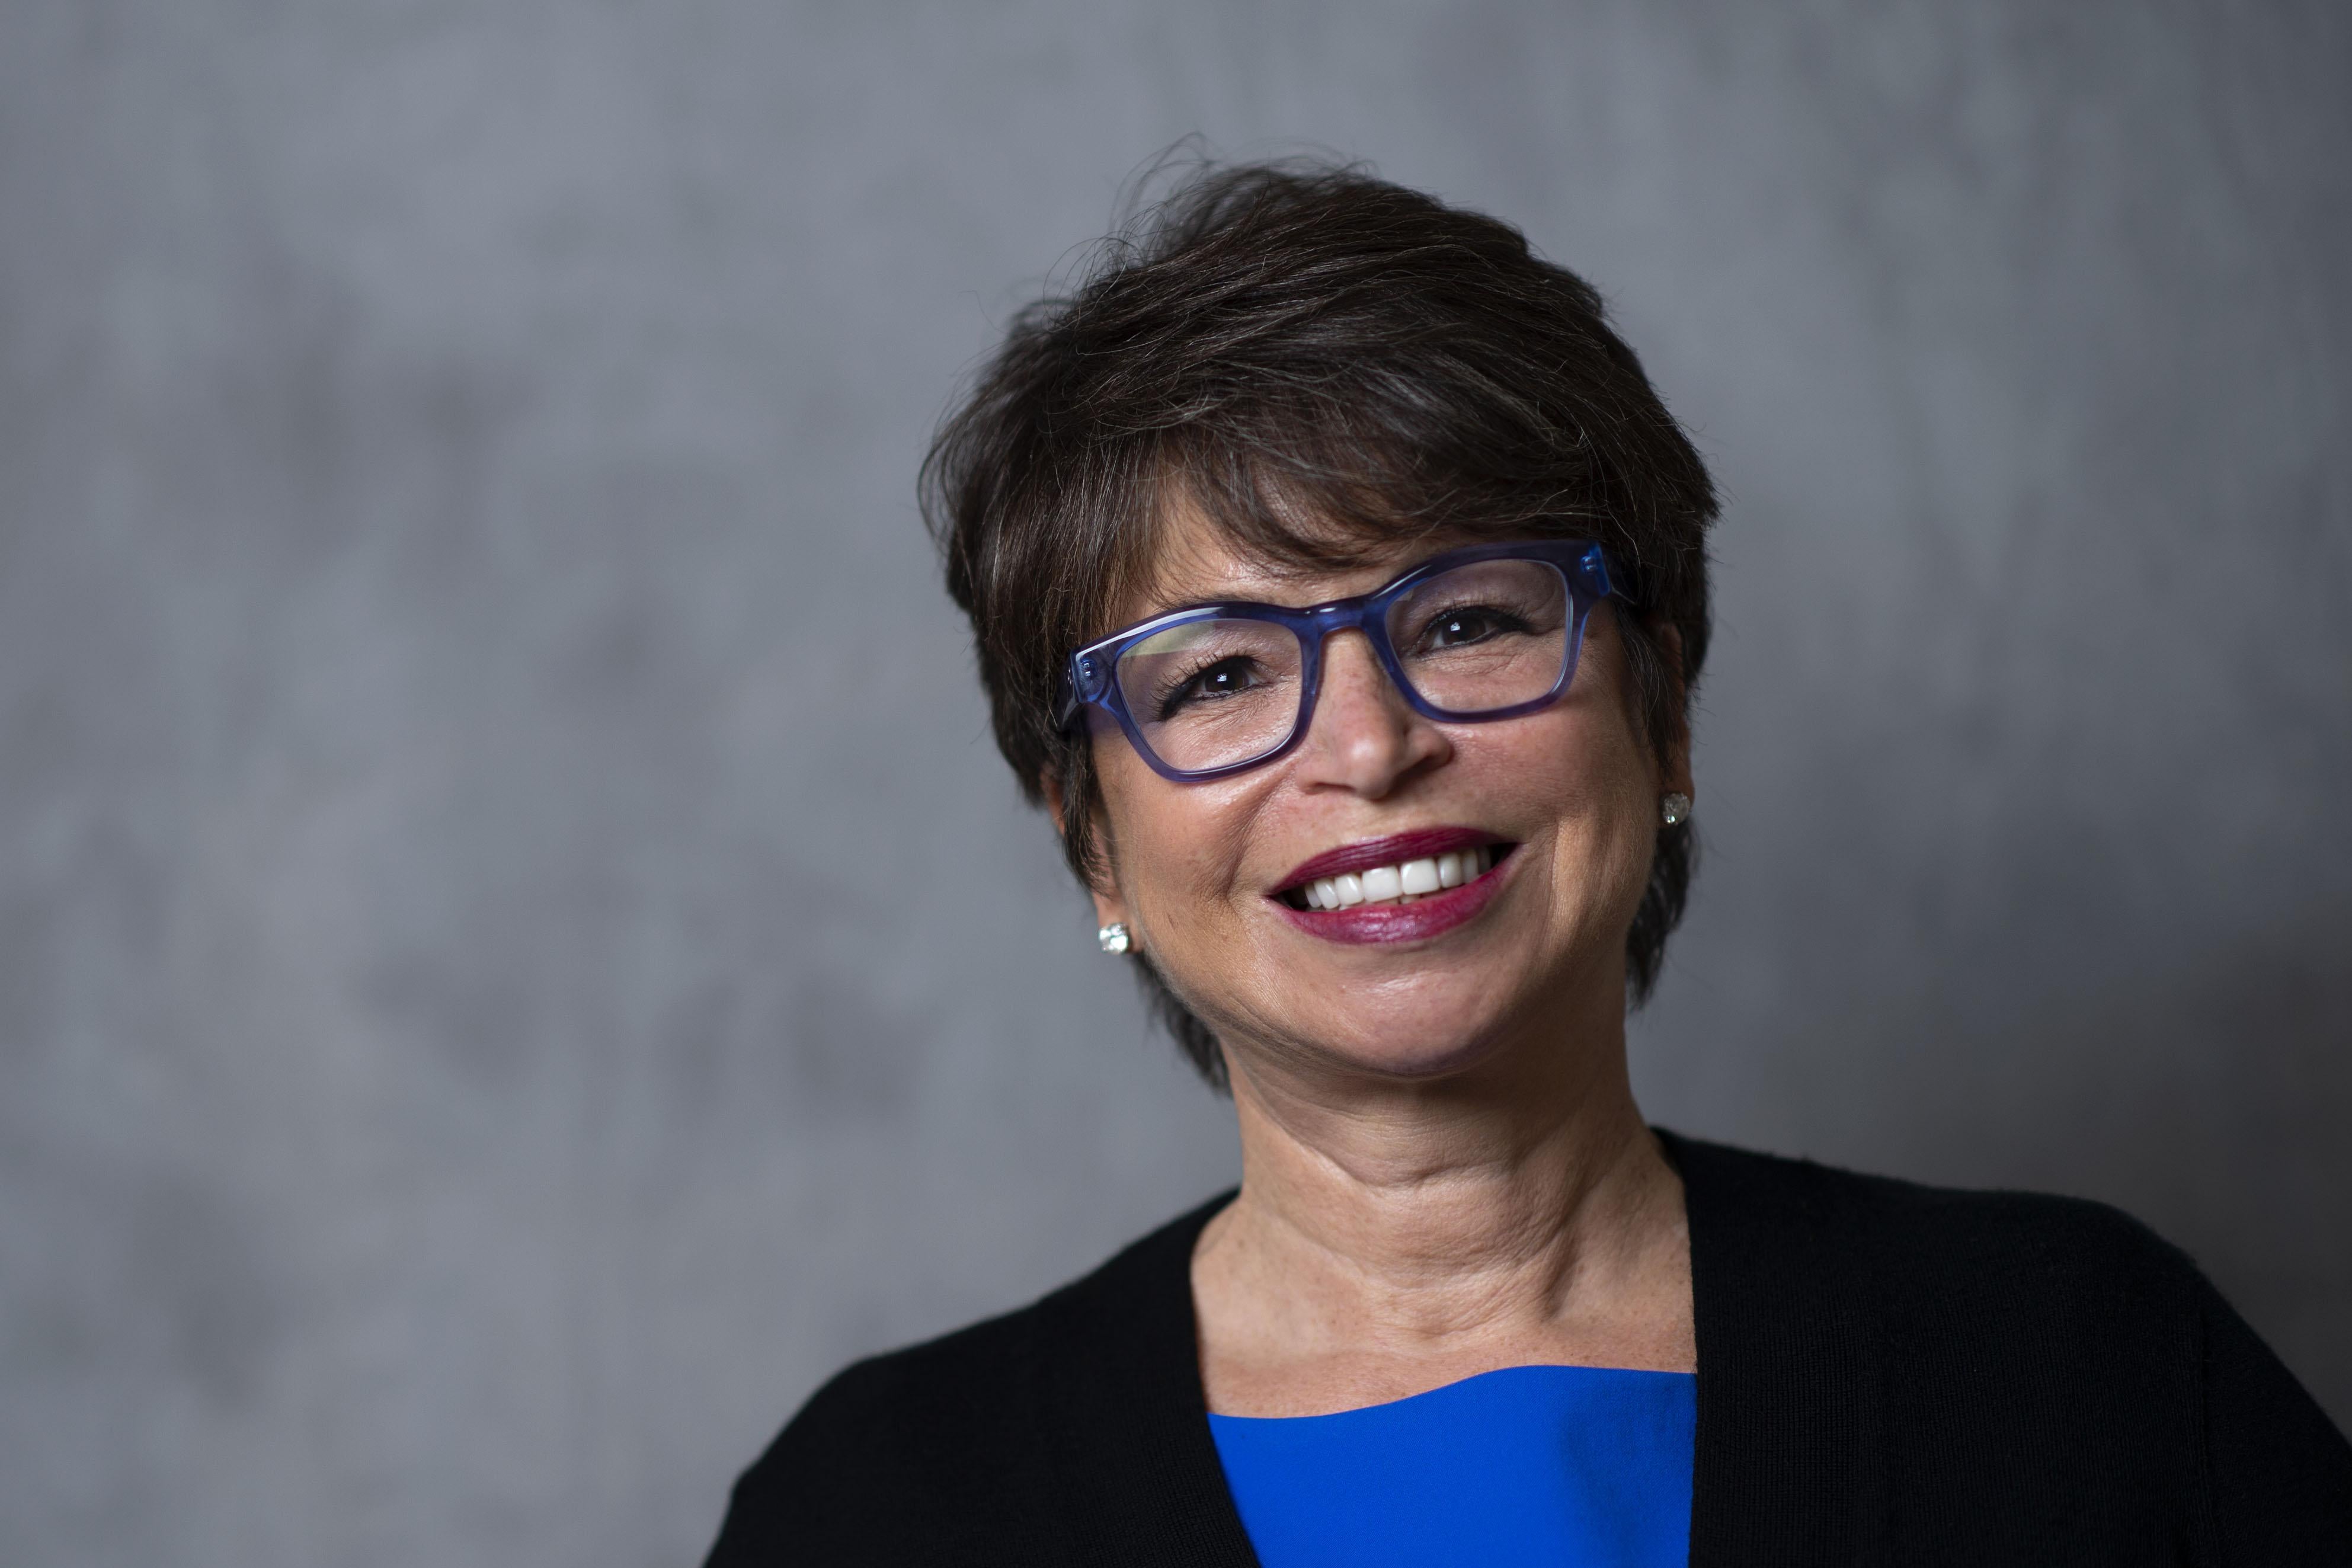 Civic leader Valerie Jarrett attends the United State of Women Summit on May 5, 2018, in Los Angeles, California. (Photo by VALERIE MACON / AFP)        (Photo credit should read VALERIE MACON/AFP/Getty Images)